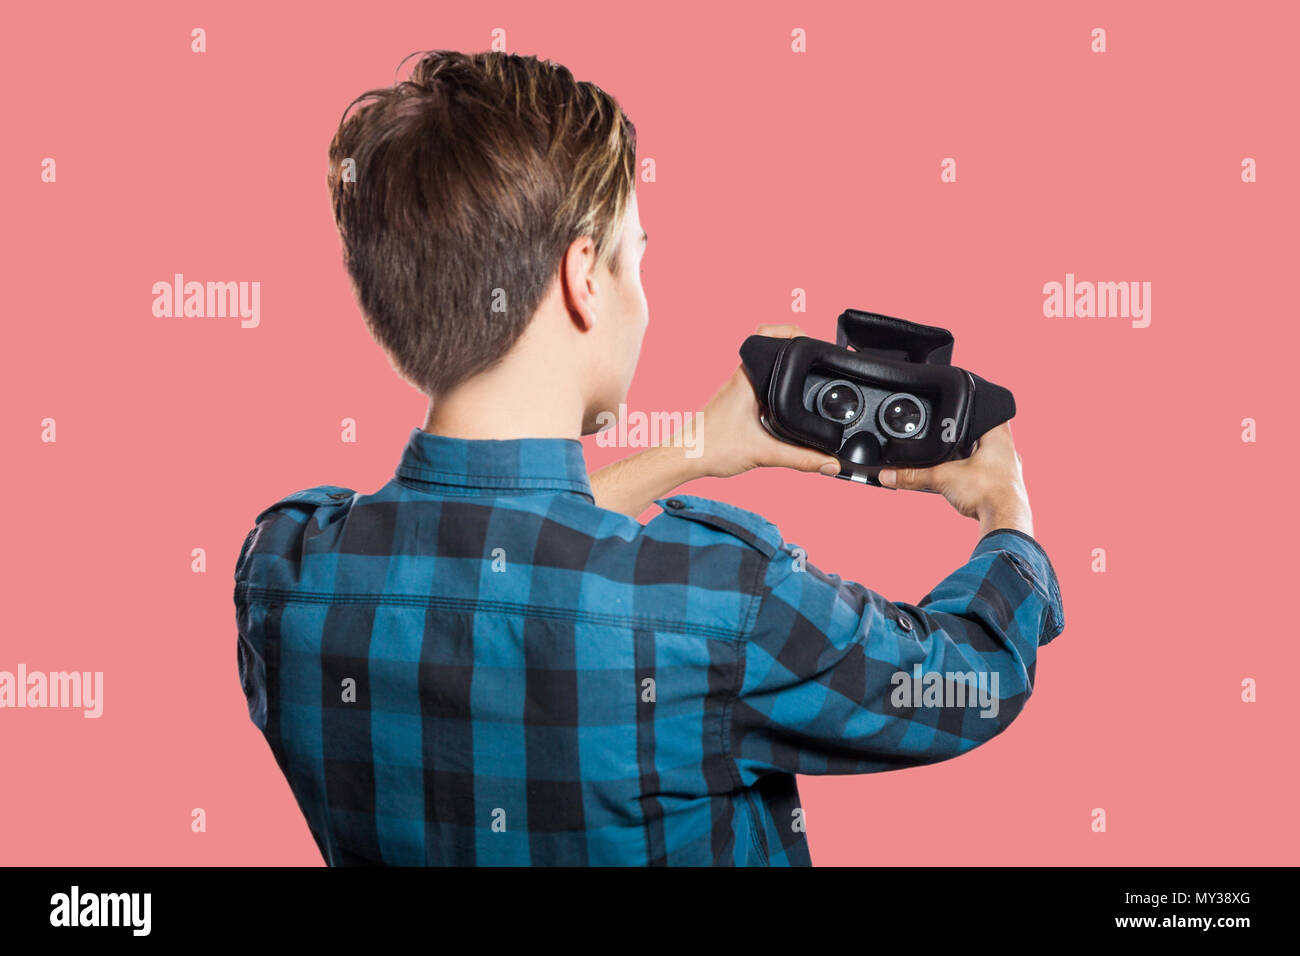 back view of young man holding vr headset. studio shot, isolated on pink background. Stock Photo